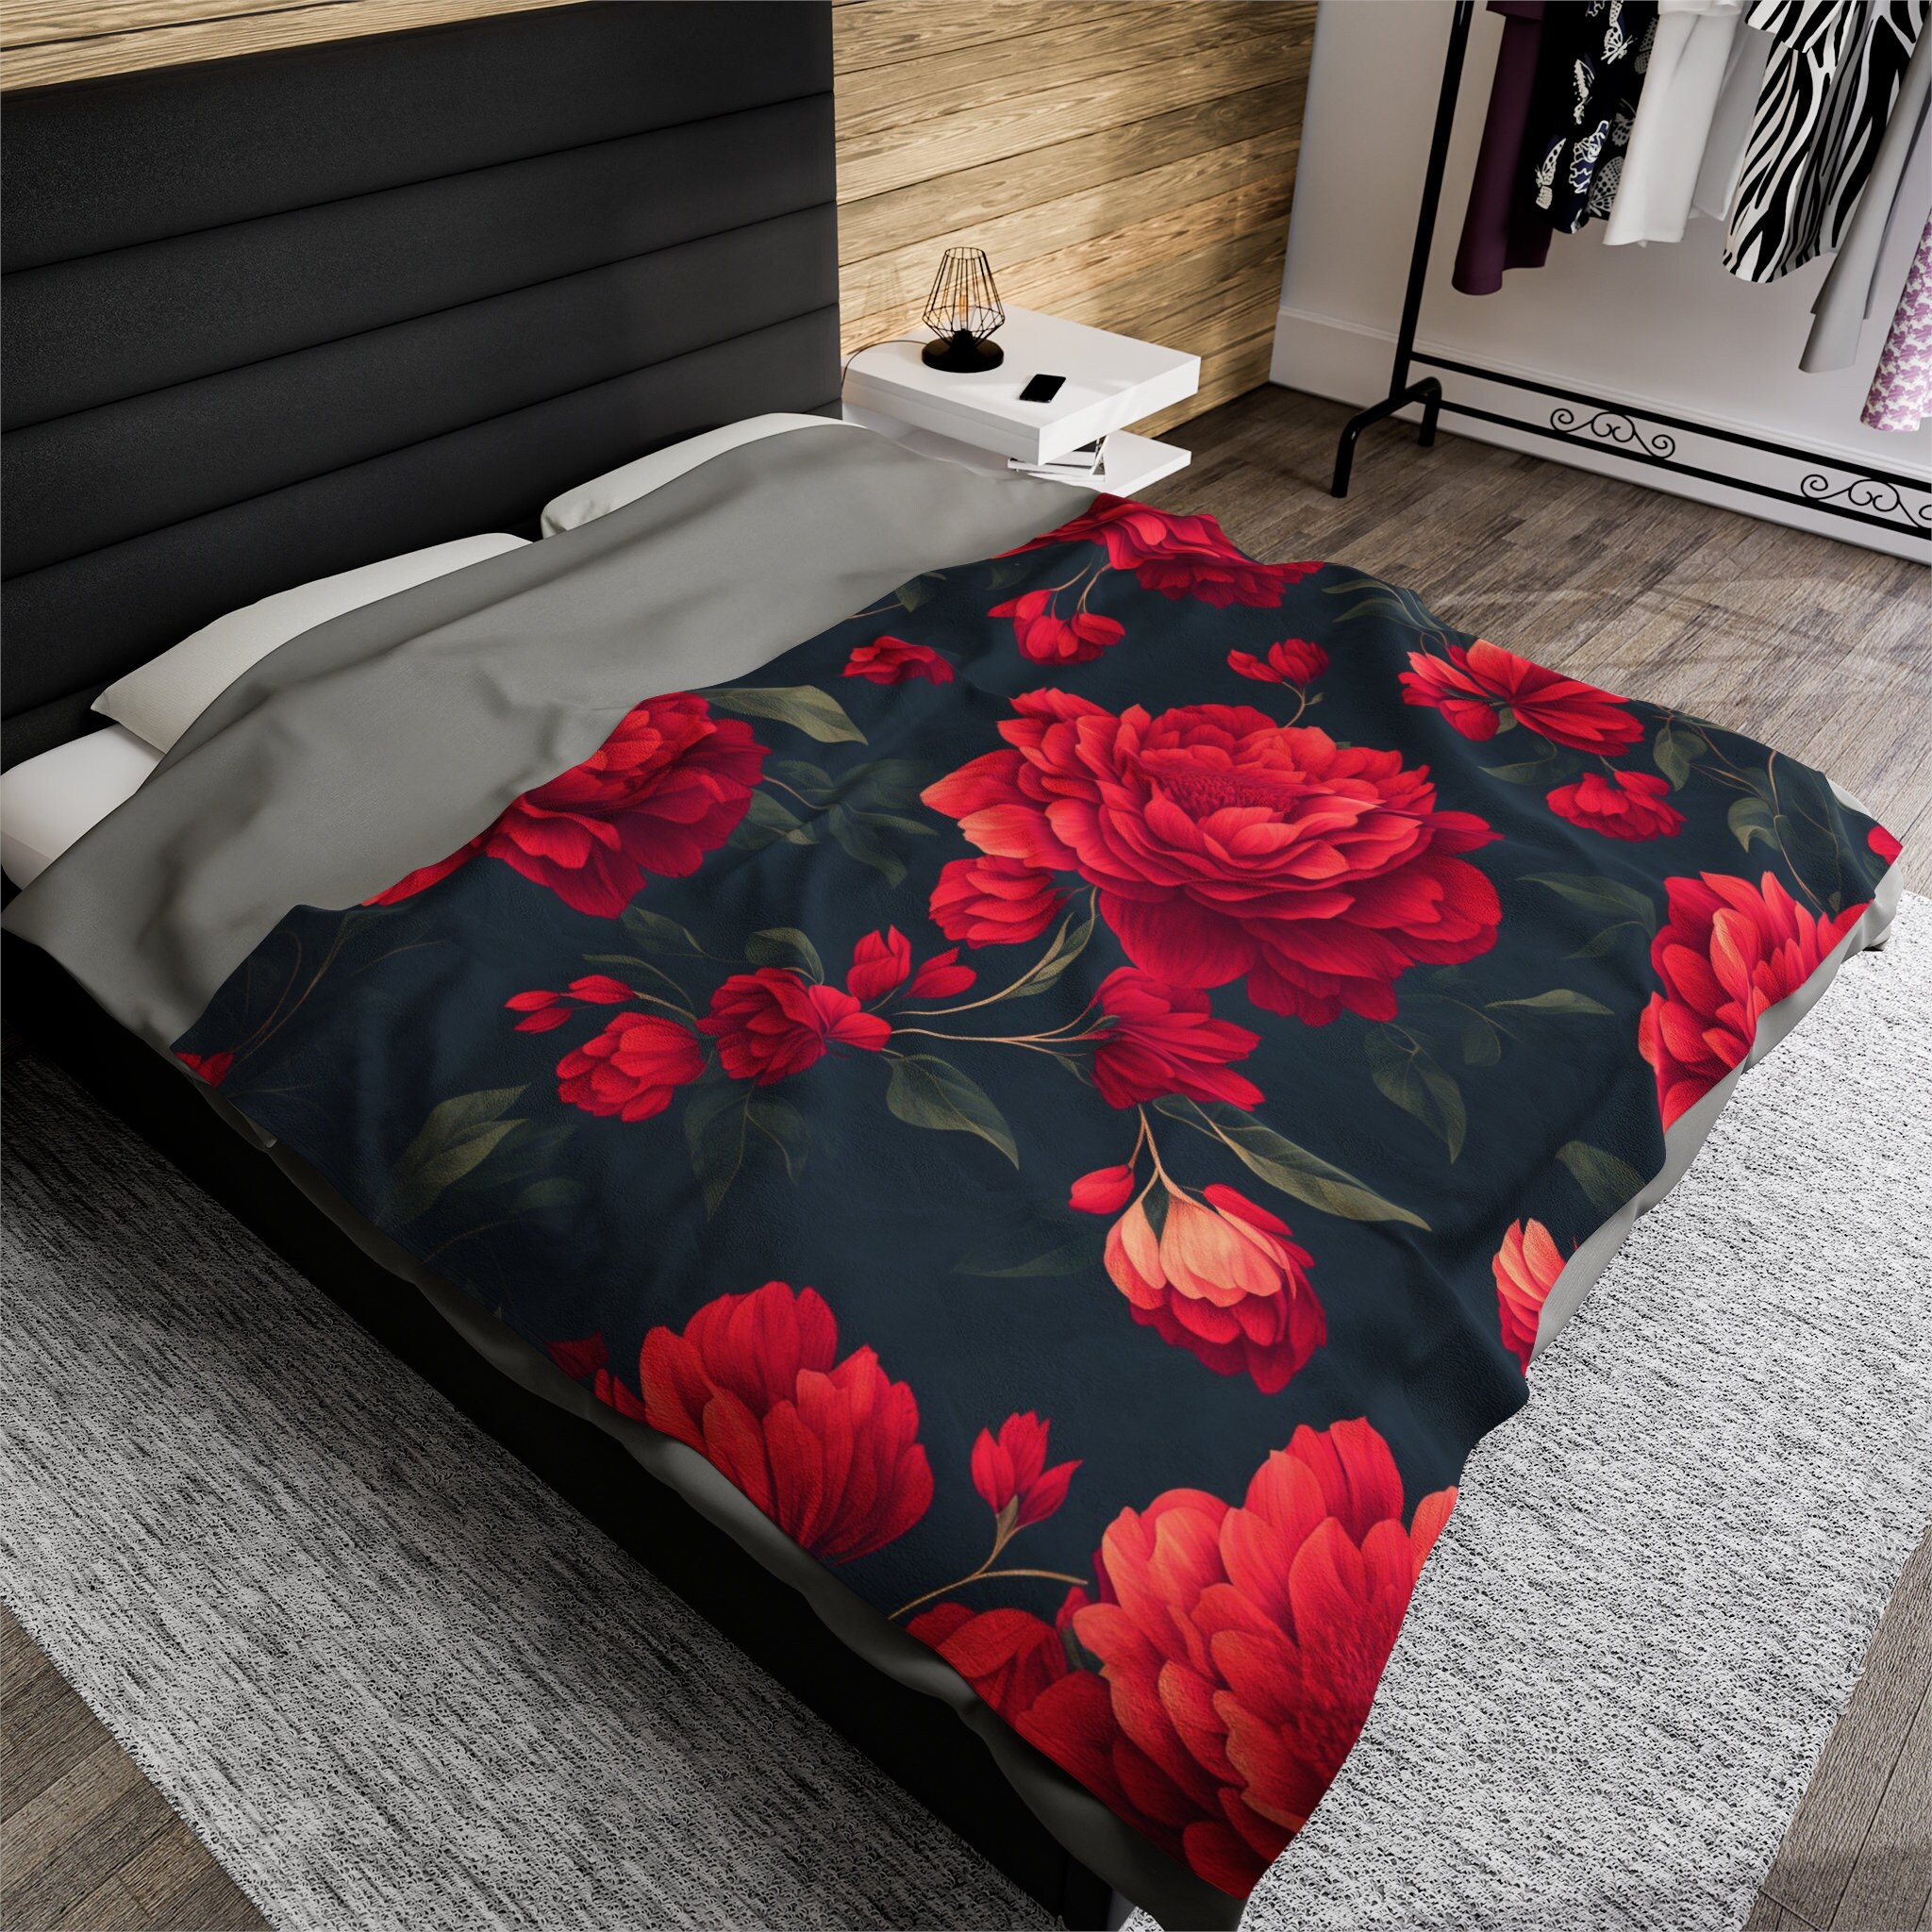 Buy Red Rose Floral Printed King Size Bed Sheets With Set of 2 Pillow –